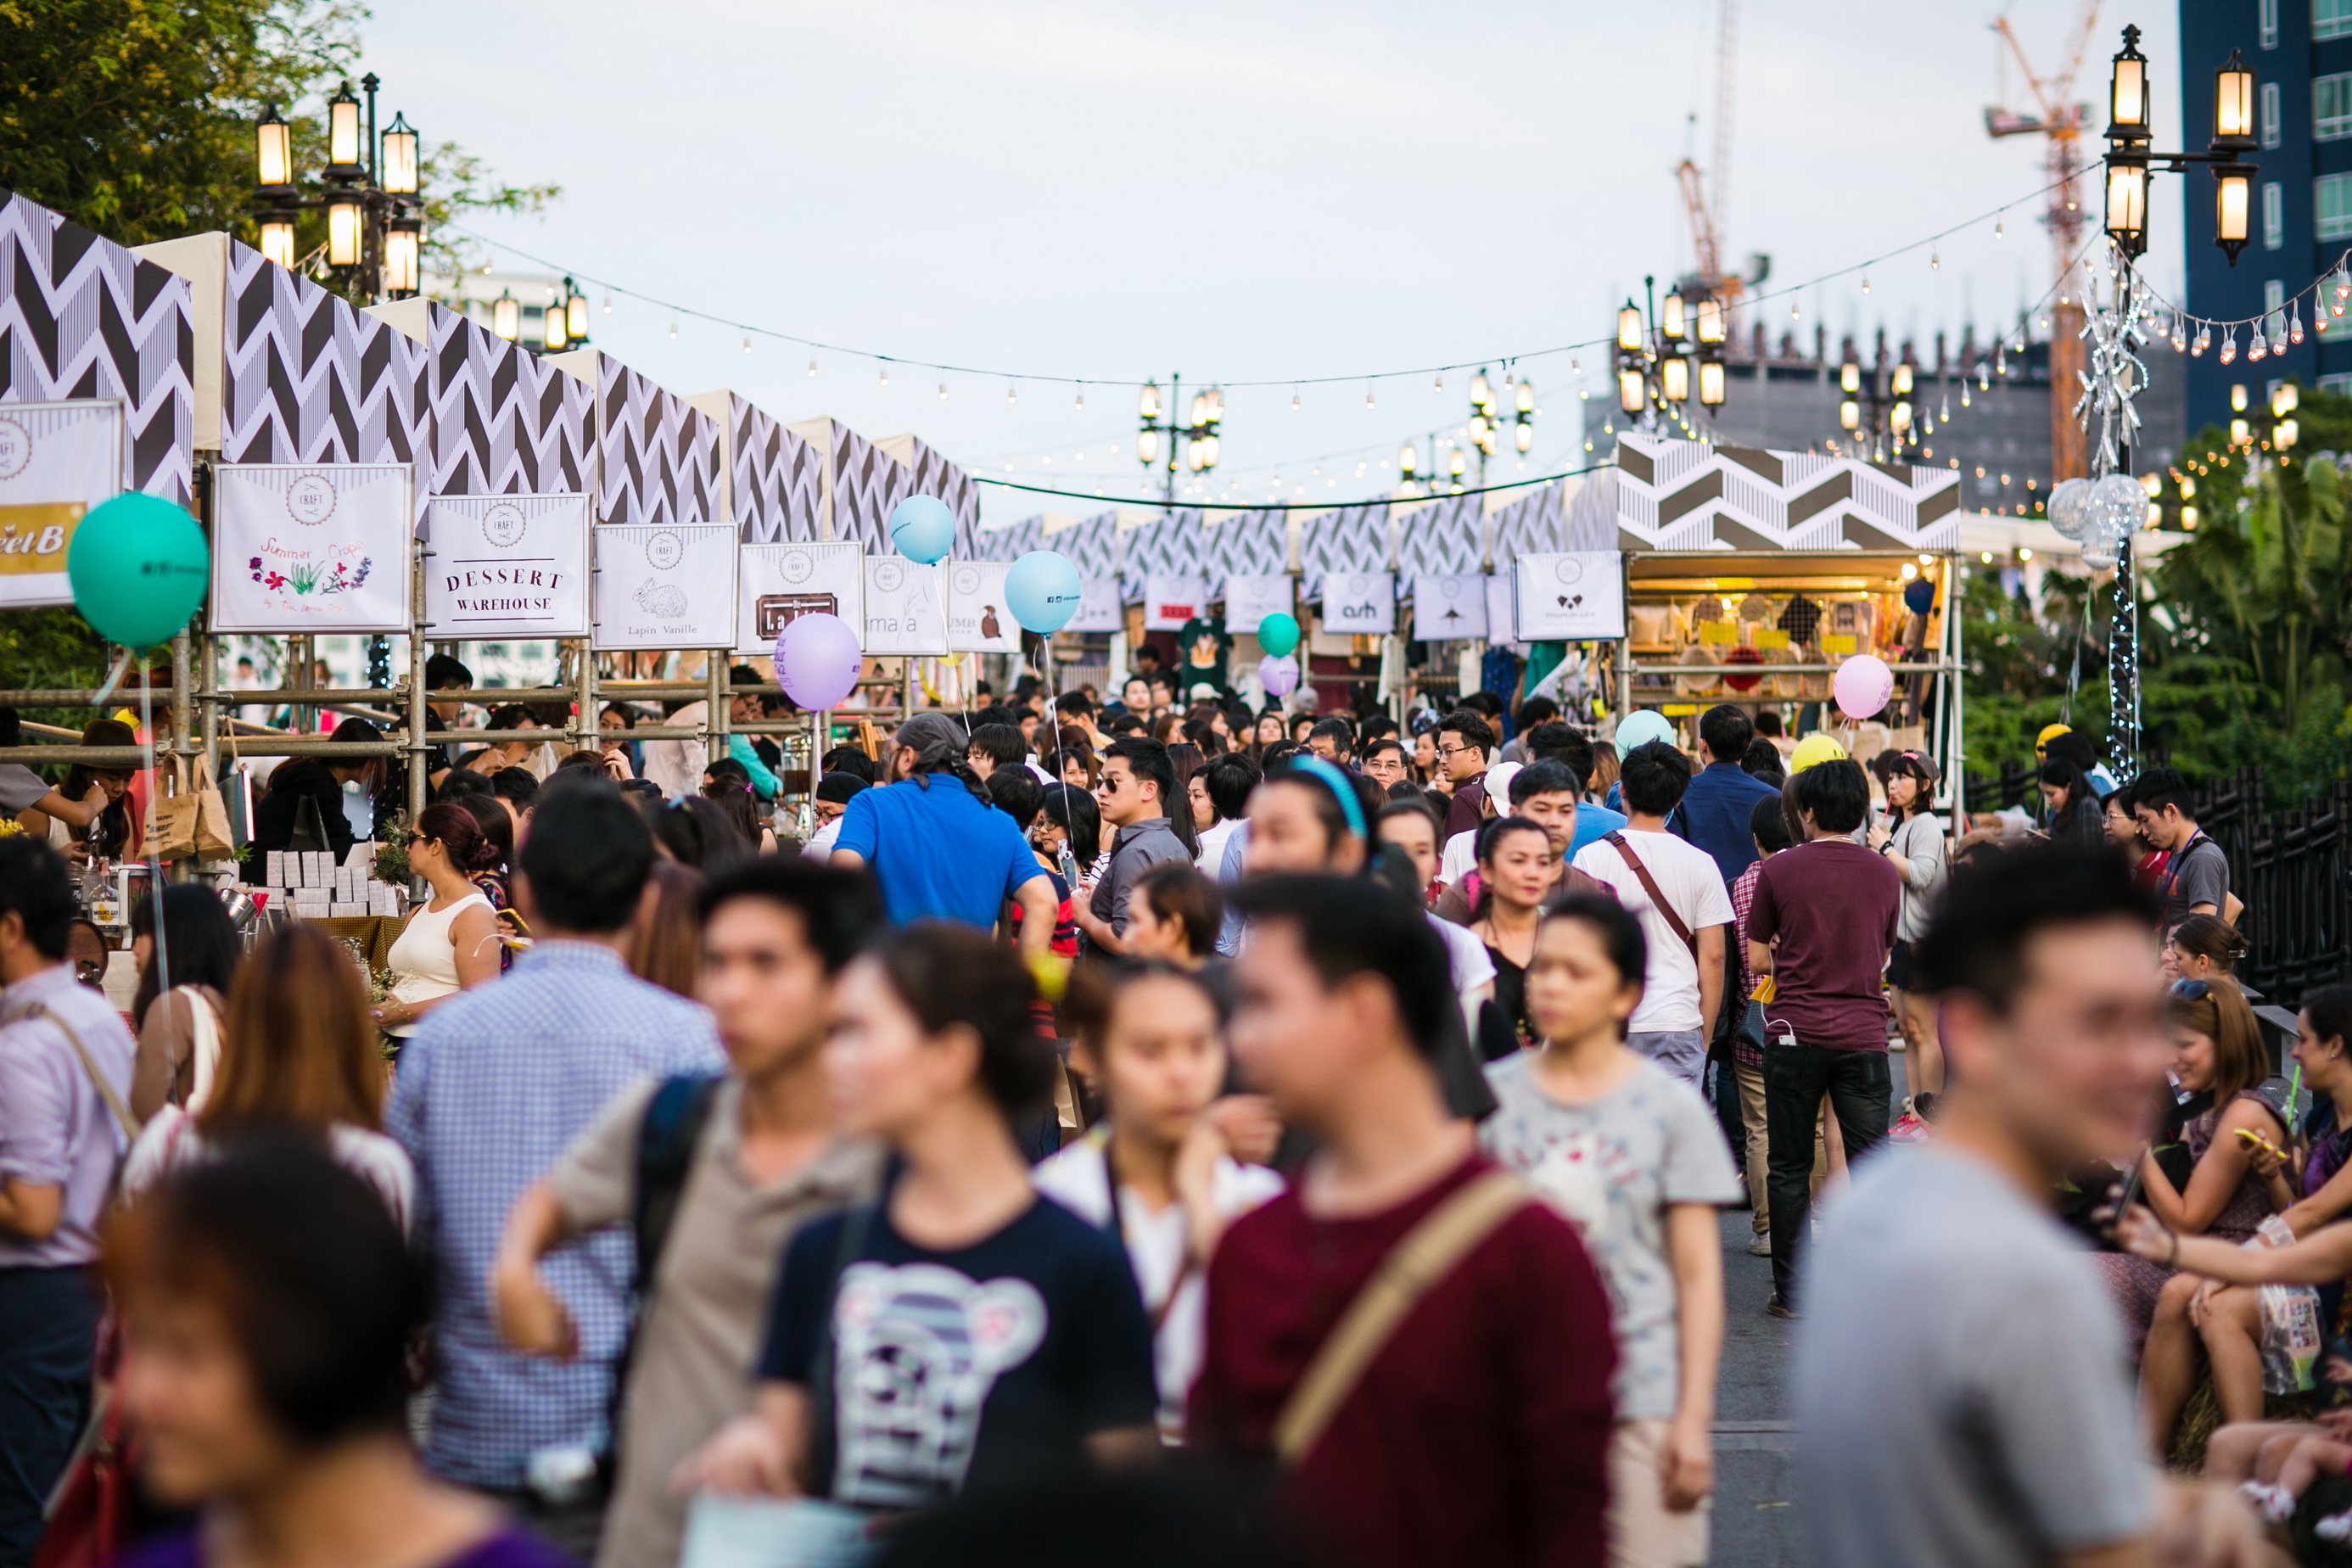 Winter Market Fest “Live and Let’s Grow” Things to do in Bangkok